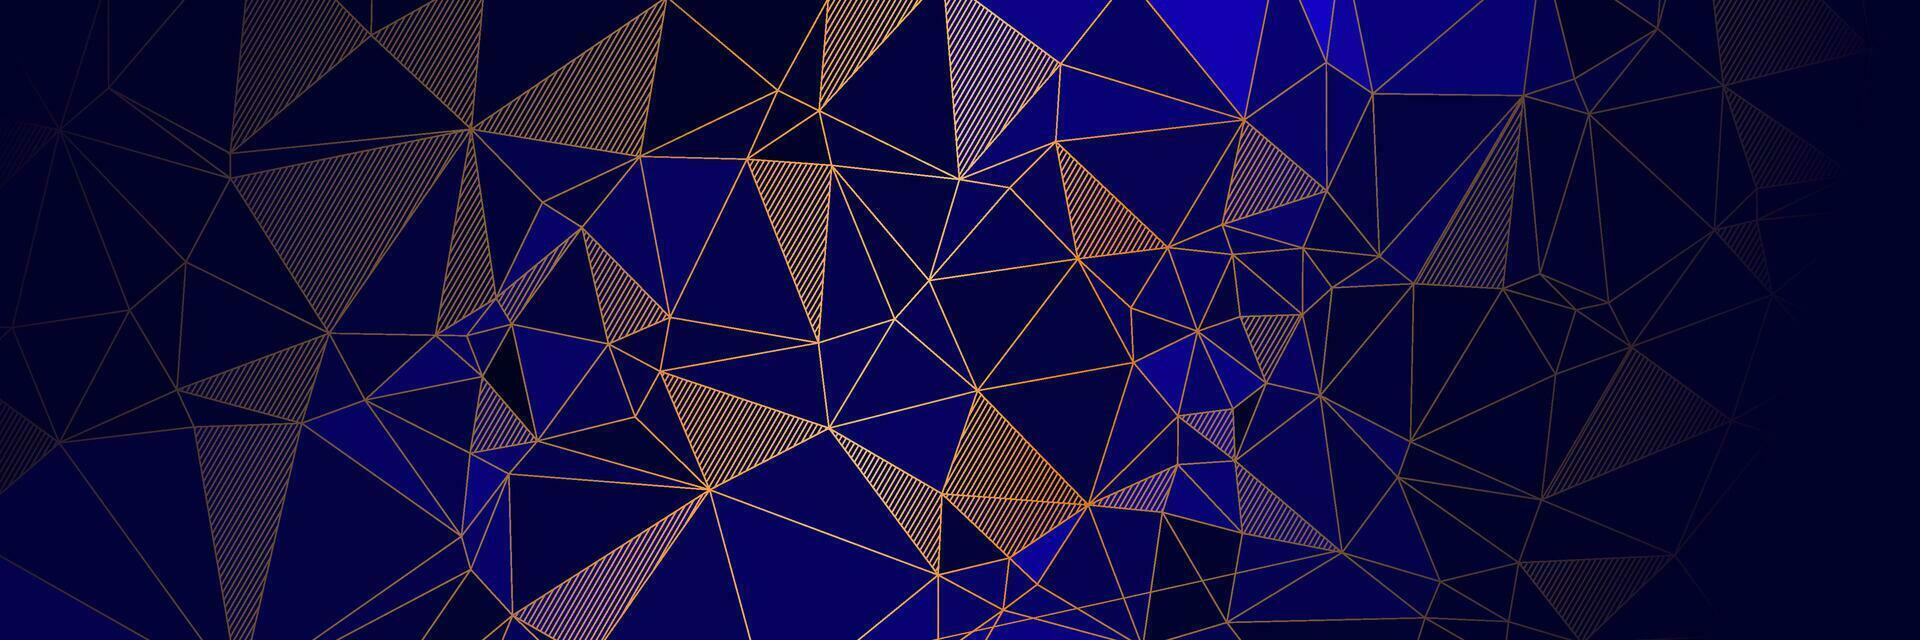 abstract dark blue elegant background with gold triangles vector